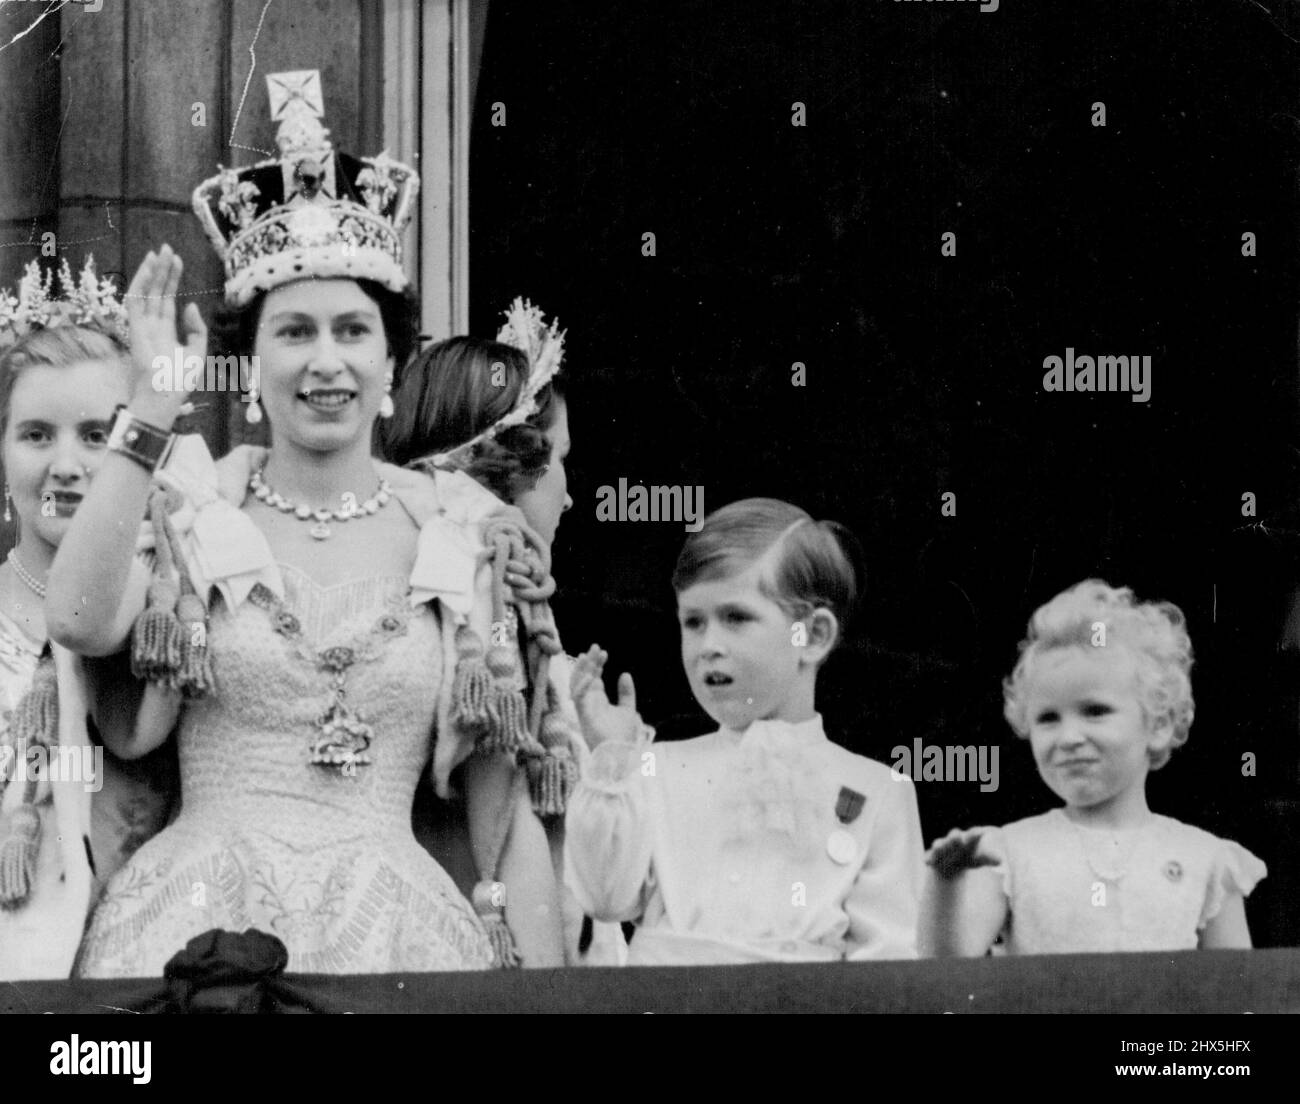 Crowned Queen And Her Children Wave From Palace Balcony -- Smiling and wearing the Imperial State Crown, the Queen is joined by her children, Prince Charles and Princess Anne, in waving from Buckingham Palace balcony to the cheering crowds in front of the Palace after the Coronation to-day (Tuesday). On left, behind the Queen, is Lady Anne Coke, one of the Queen's six maids of Honour at the Coronation. As the Queen, the Duke of Edinburgh and other members of the Royal Family appeared on the balcony, 168 jet fighters flew over in the Royal Air Force salute to the newly-crowned Sovereign. June Stock Photo